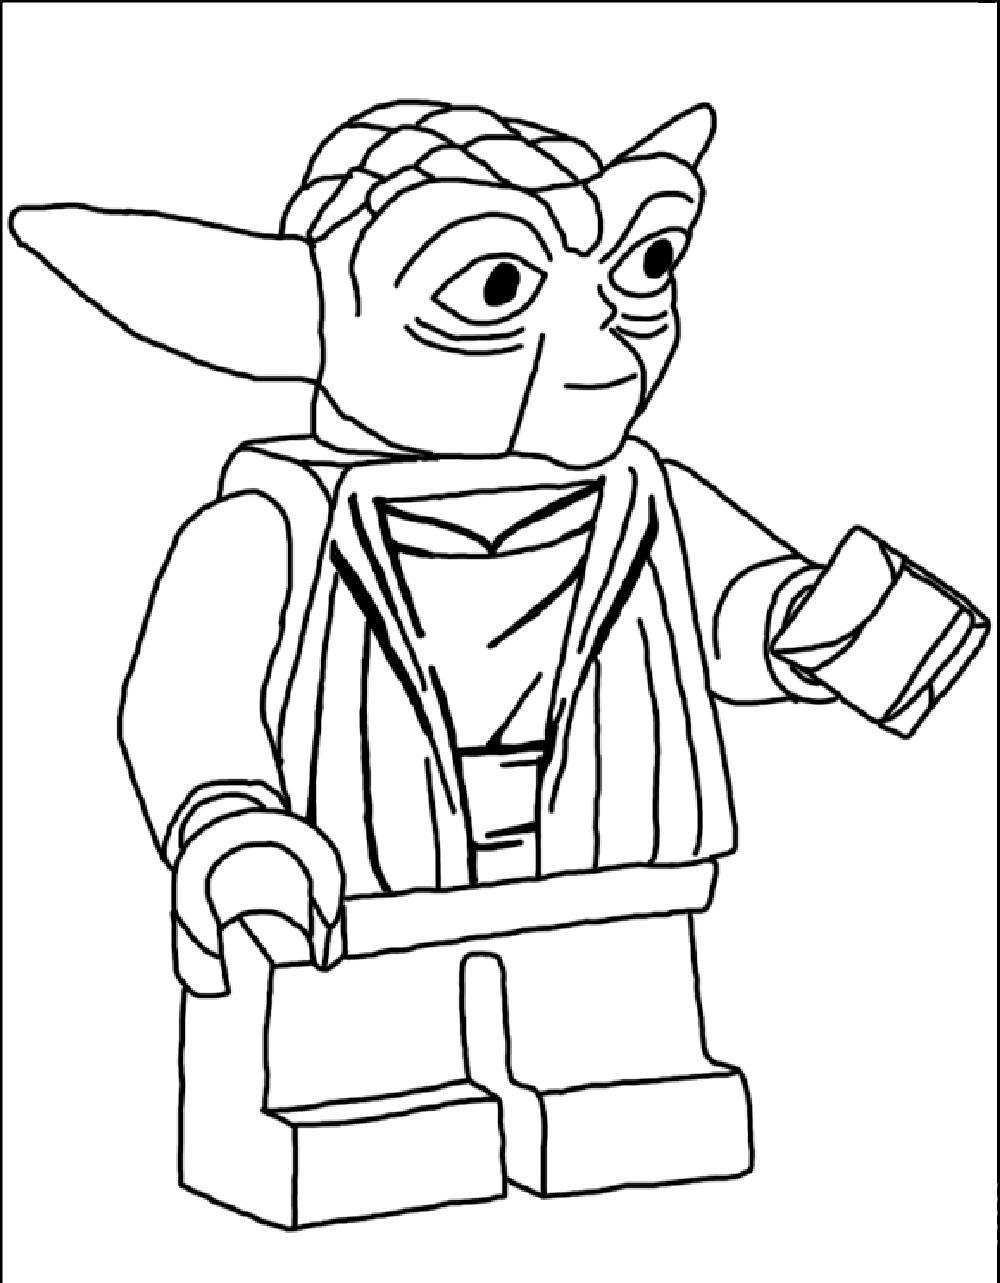 legos star wars coloring pages lego star wars coloring pages to print bestappsforkidscom legos pages coloring star wars 